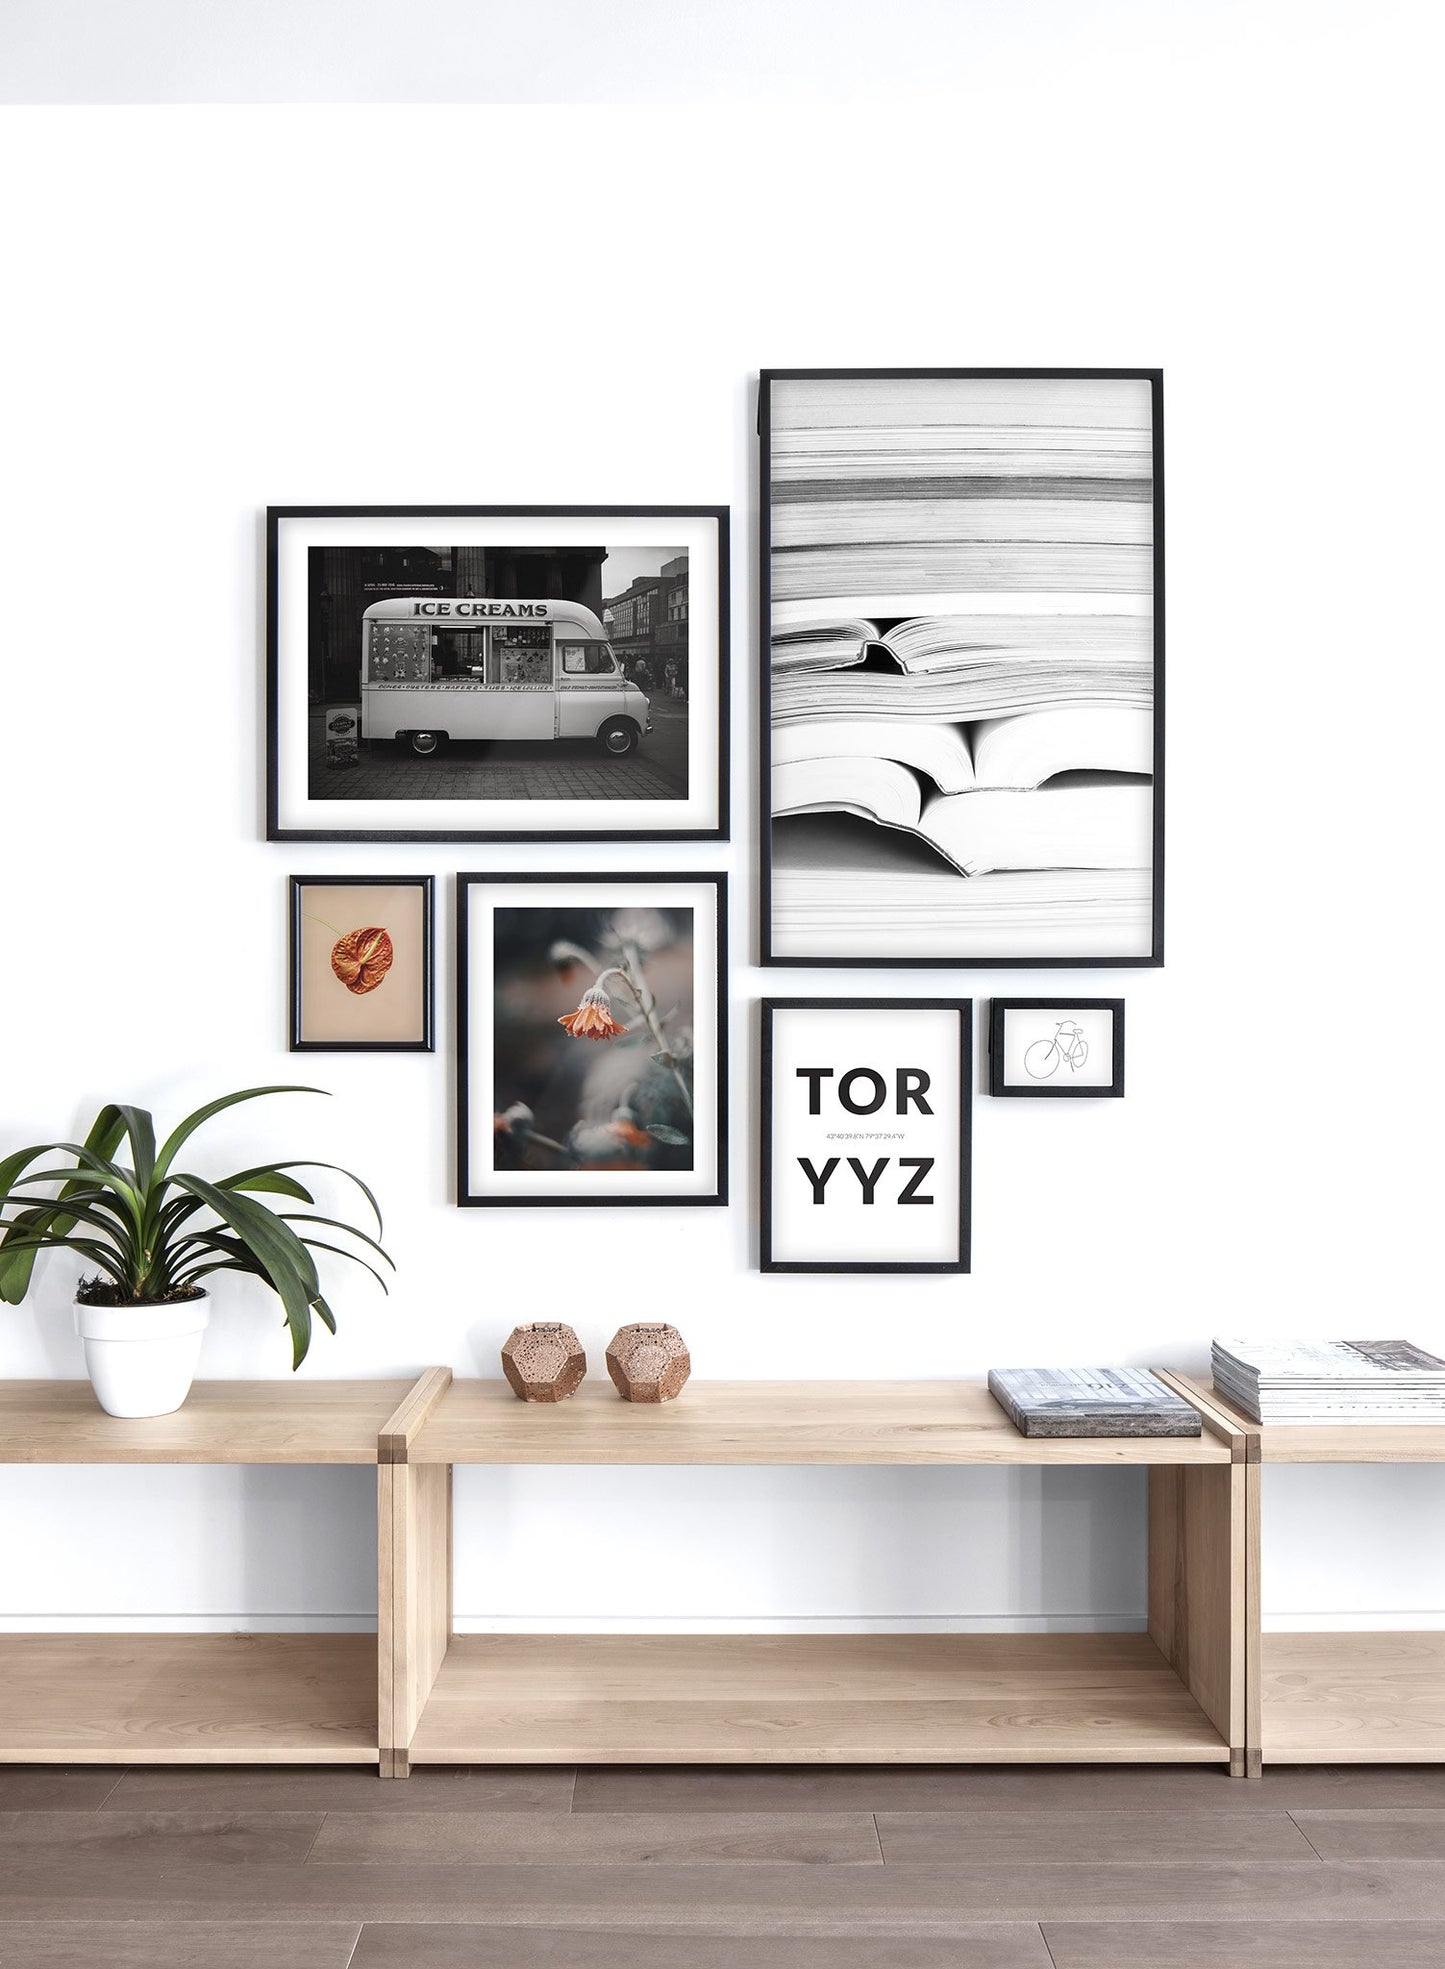 Modern minimalist photography by Opposite Wall with black and white poster of vintage ice cream truck - Lifestyle Gallery - Living Room